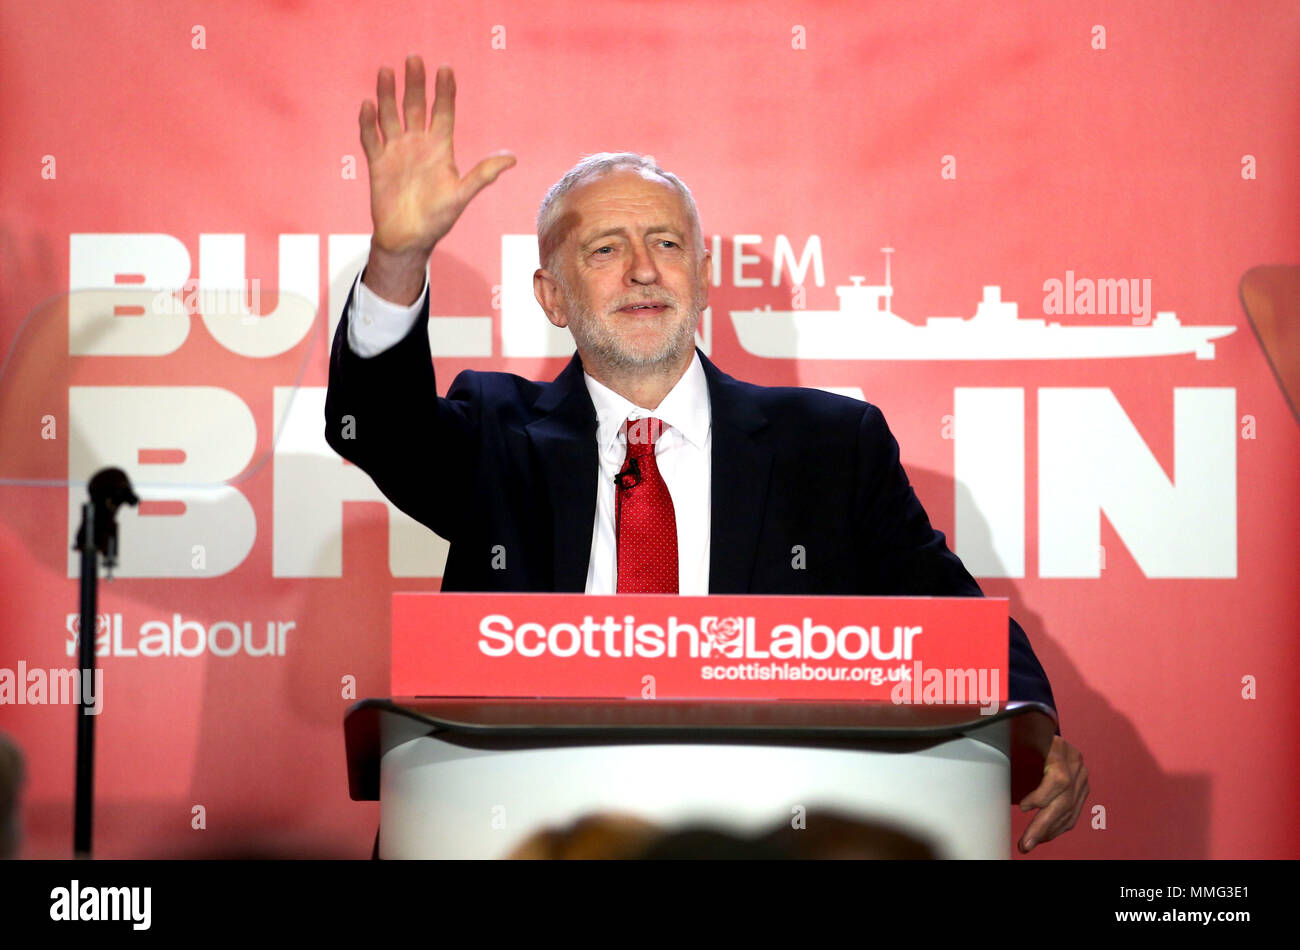 Labour leader Jeremy Corbyn at the Fairfield Ship Building Museum in Glasgow, where the Labour Party called for support for UK shipbuilding as part of a wider industrial strategy and call on the Conservative Government to guarantee that three new Royal Fleet Auxiliary vessels will be built in domestic shipyards. Stock Photo